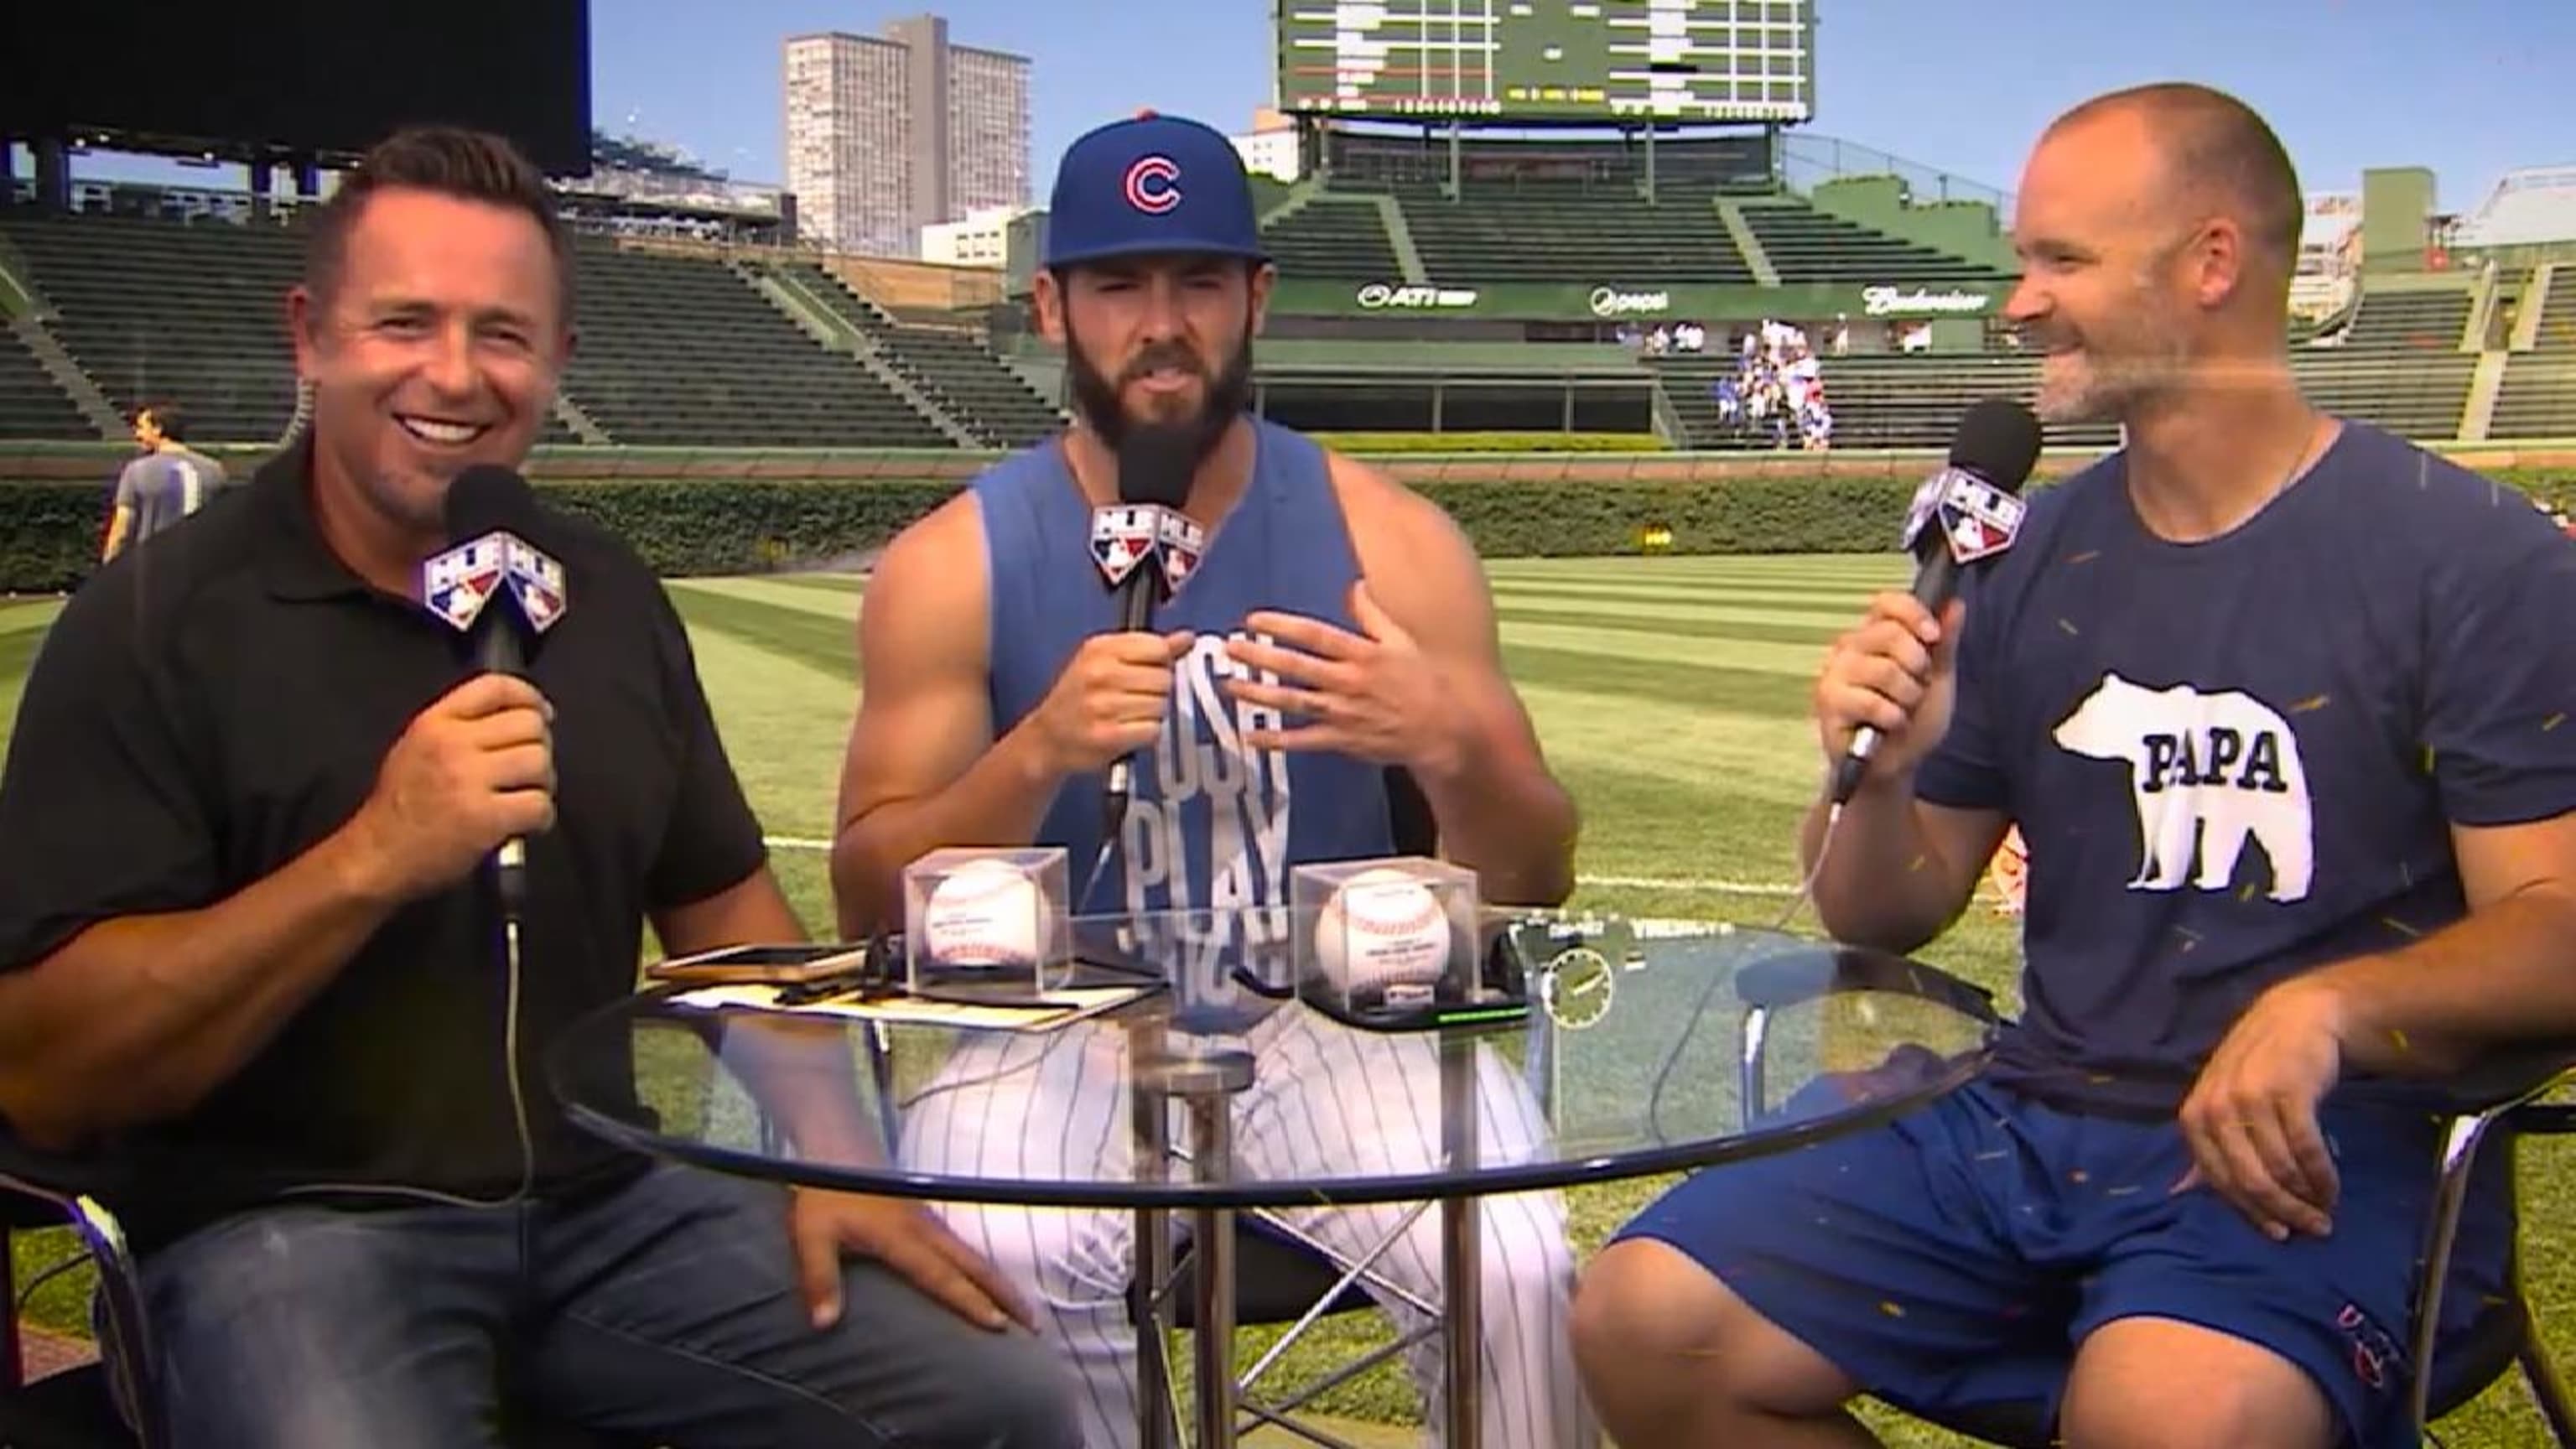 Why haven't the Cardinals or Brewers signed Jake Arrieta already?